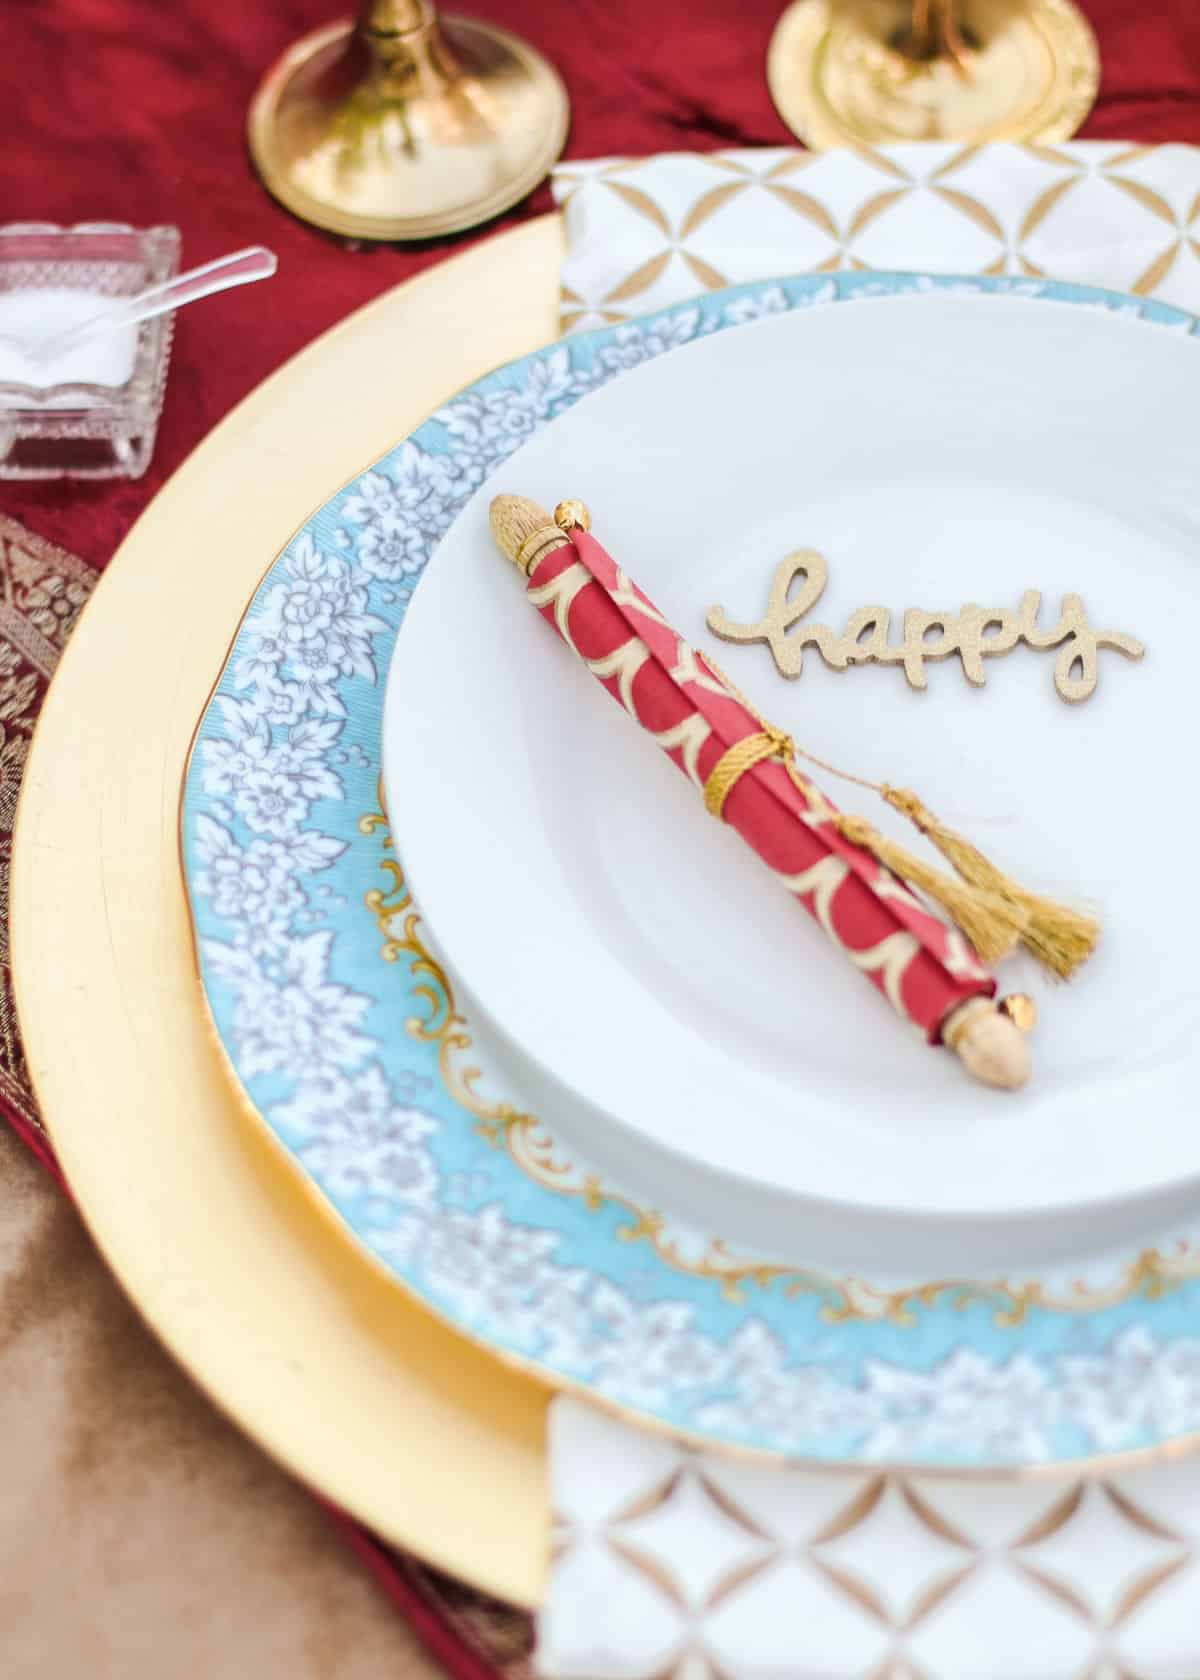 layered place setting dishes on gold charger with paper scroll on top of plate.